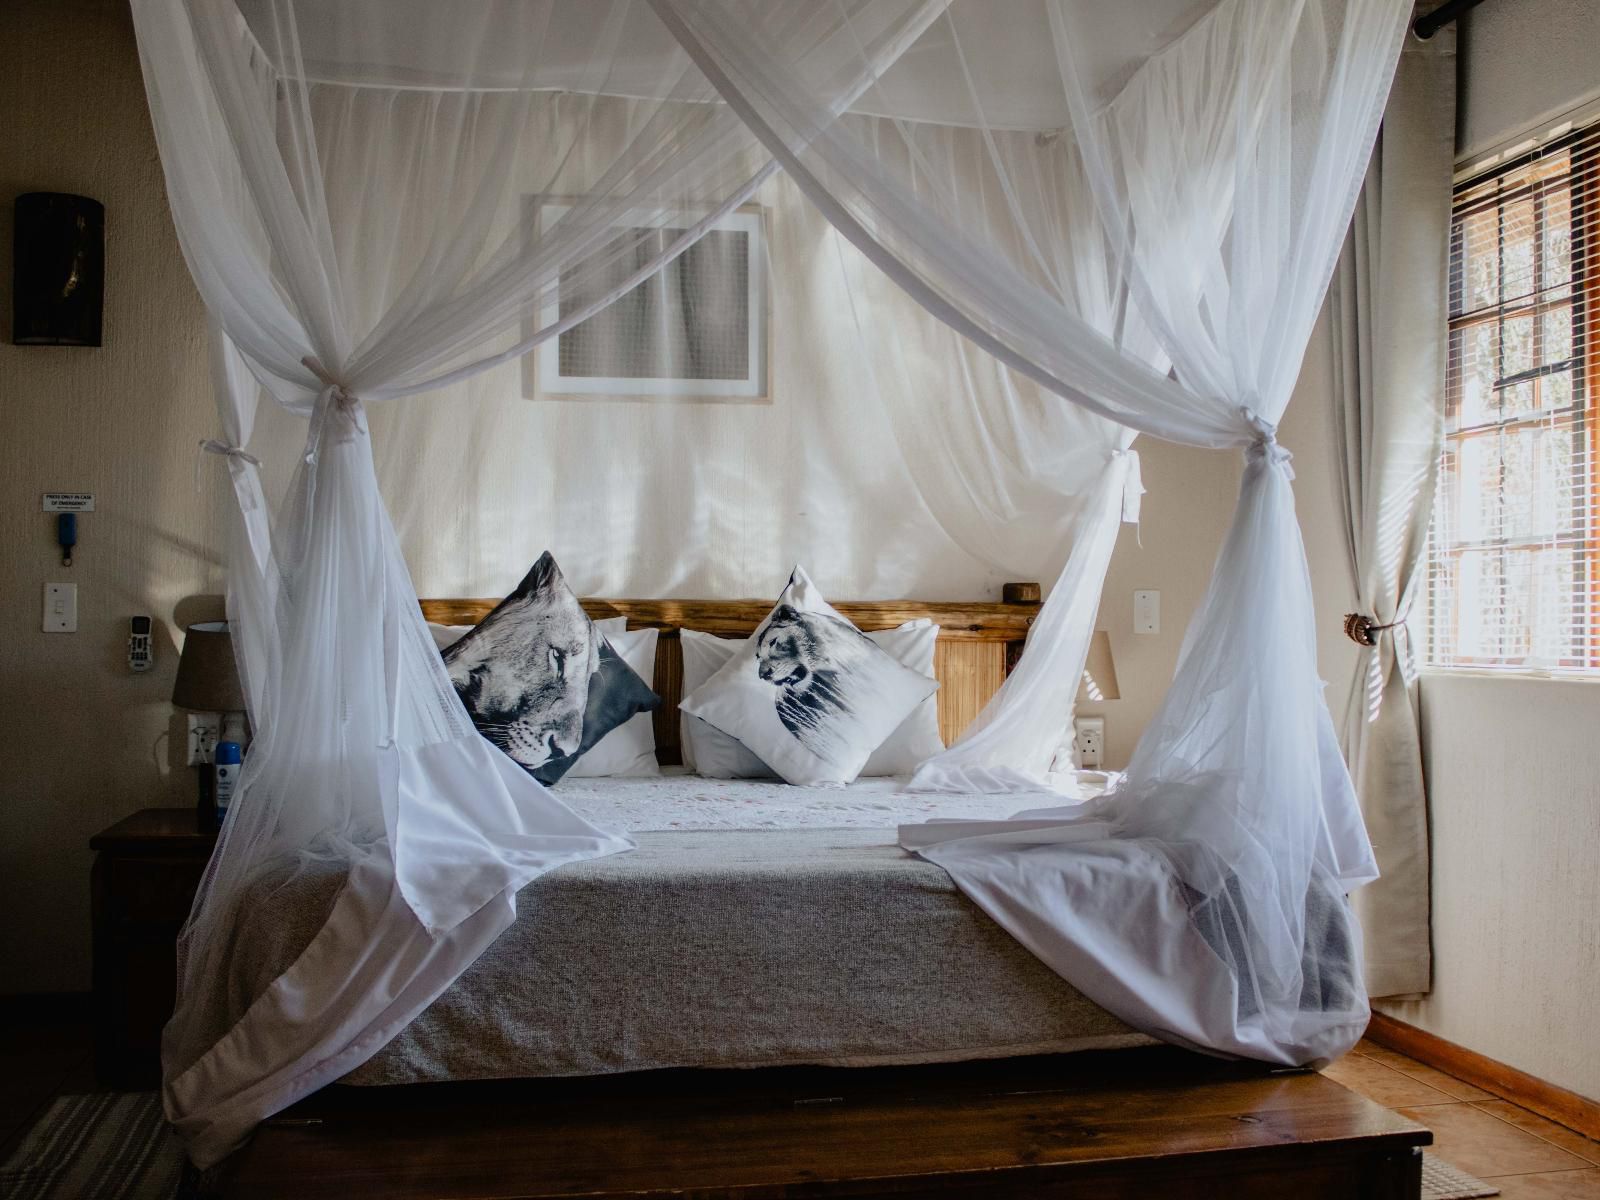 Royal Kruger Lodge Marloth Park Mpumalanga South Africa Tent, Architecture, Bedroom